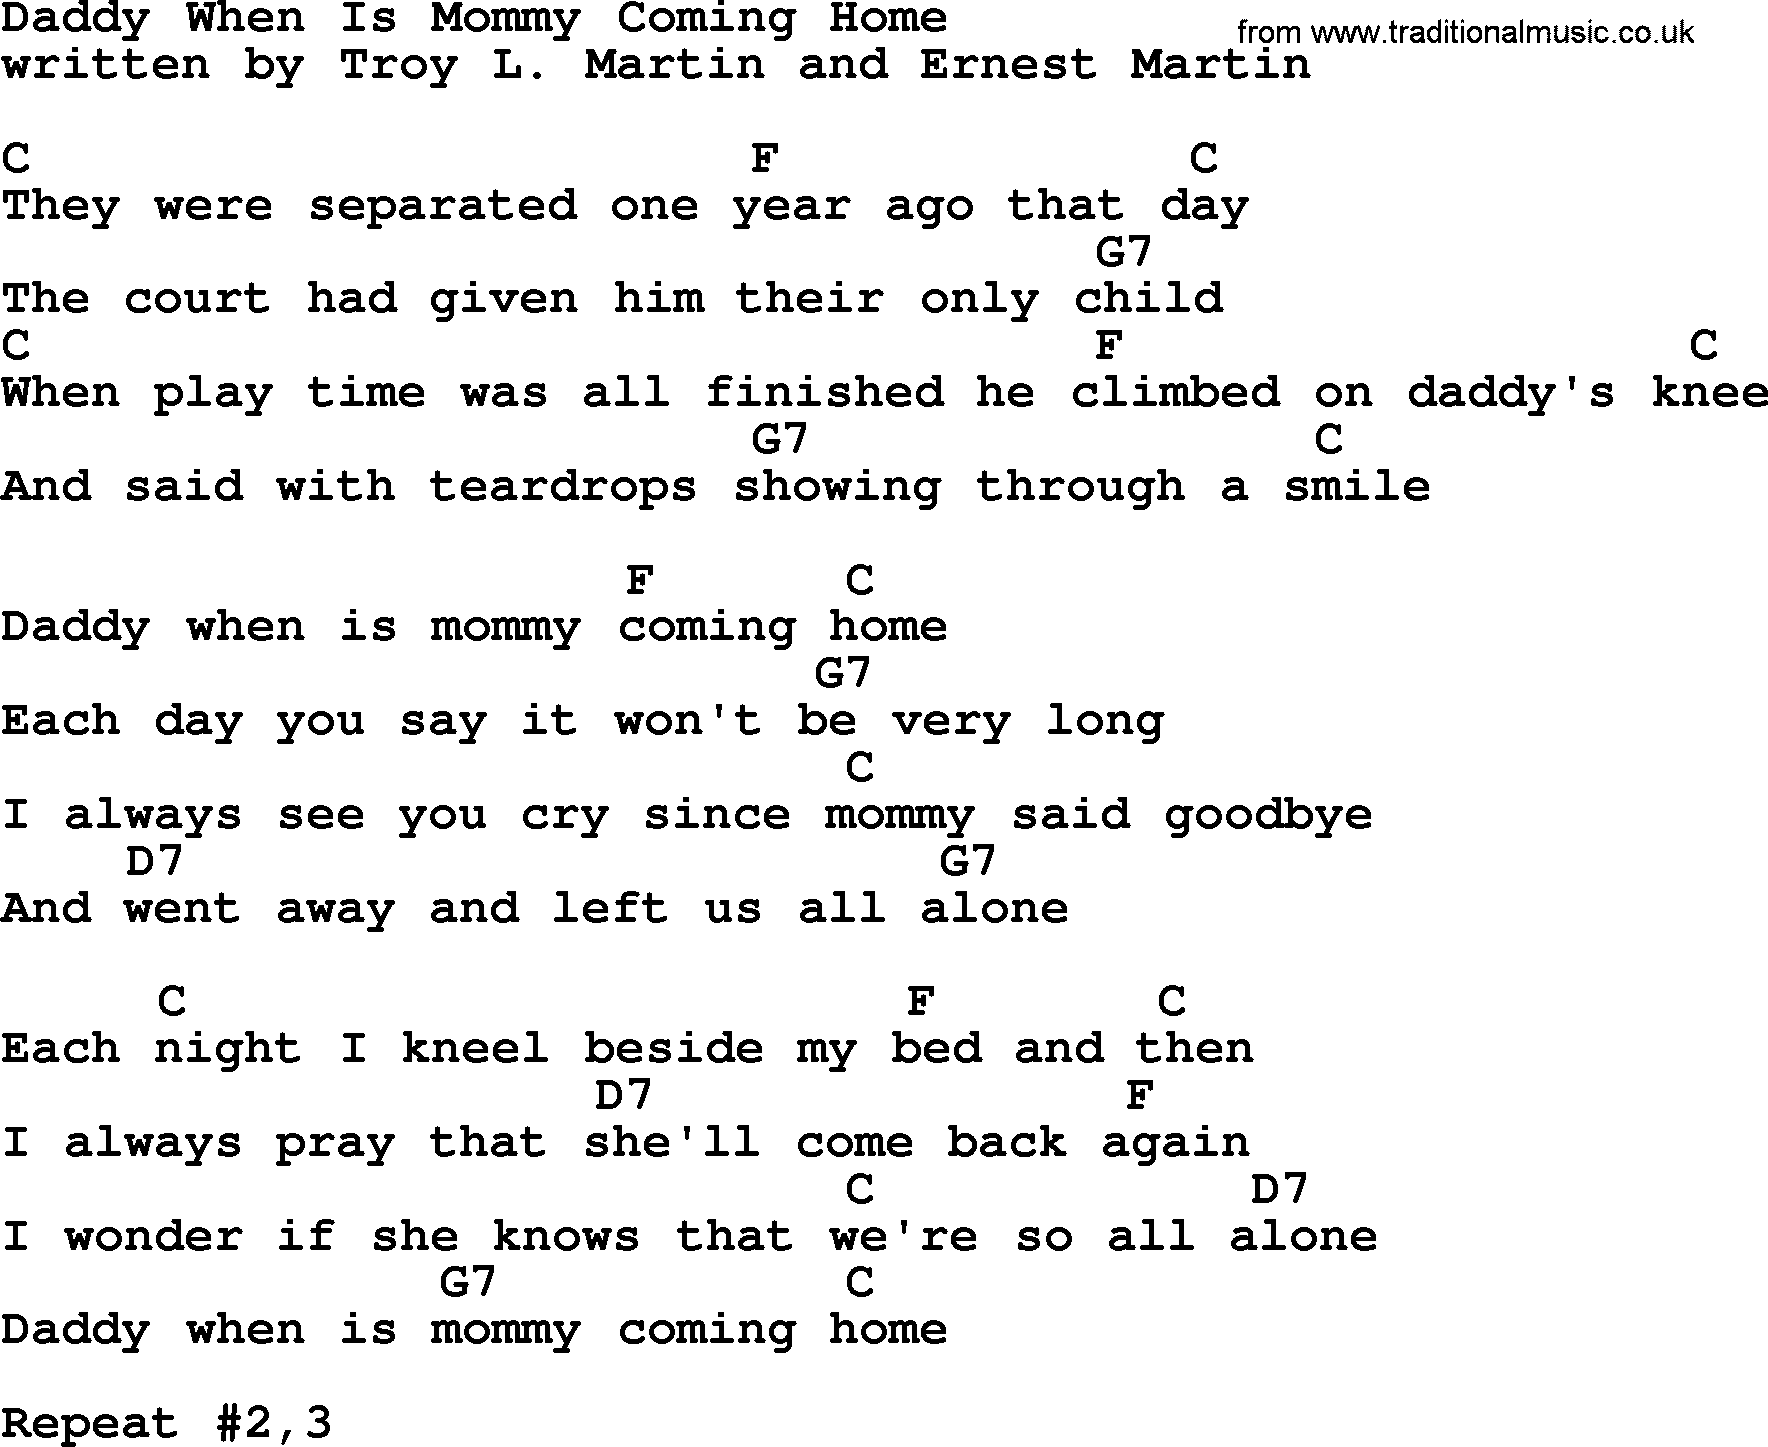 Bluegrass song: Daddy When Is Mommy Coming Home, lyrics and chords